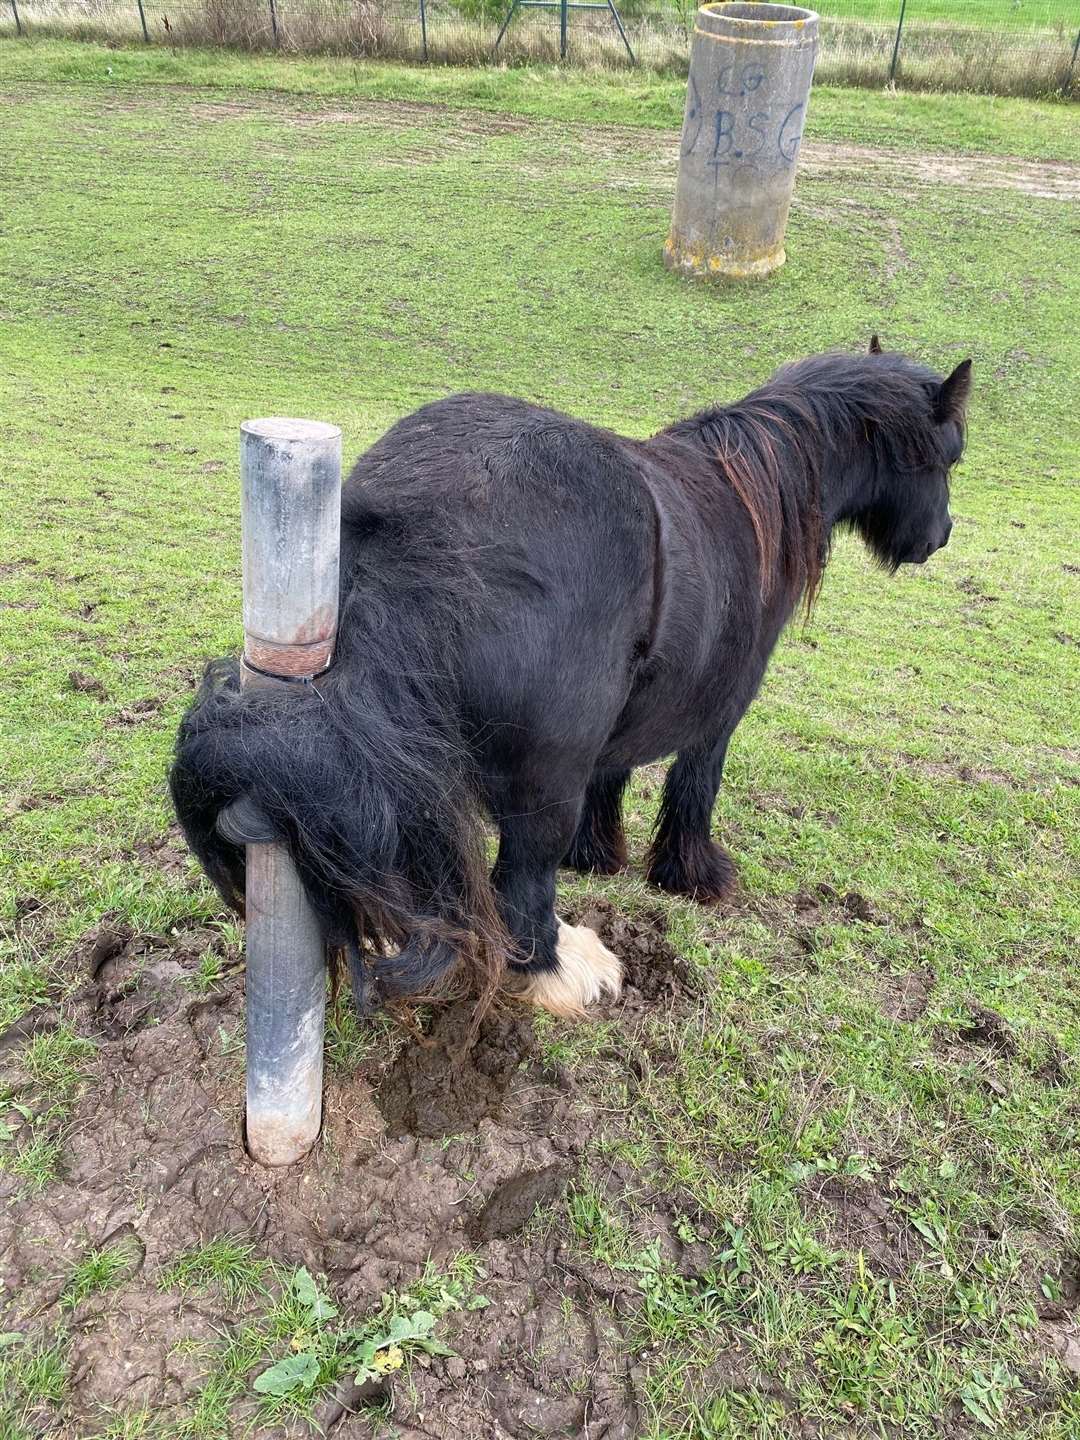 The black horse was found with it's tail tied to a concrete post in Gravesend (19879854)